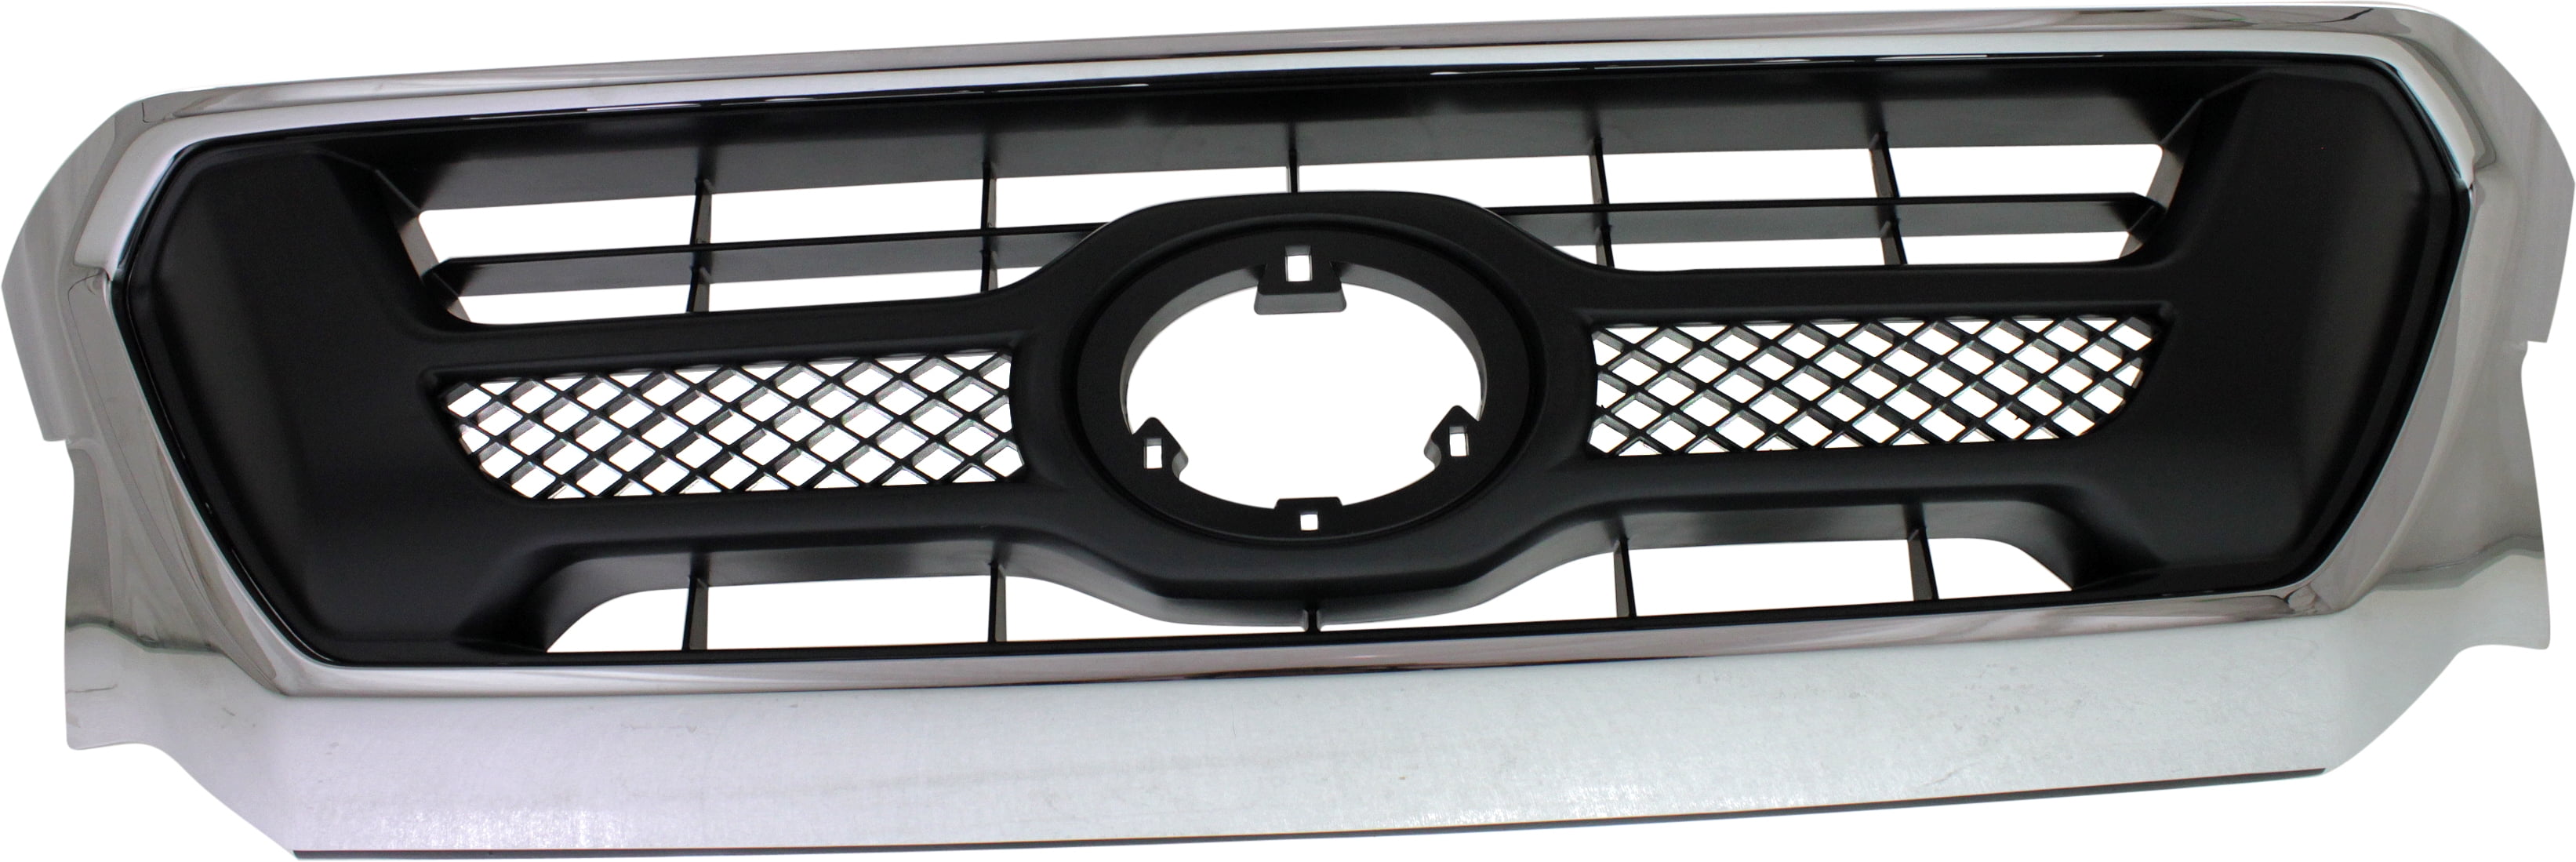 APS Compatible with 2012-2015 Toyota Tacoma Main Upper Stainless Steel Black 8x6 Horizontal Billet Grille Insert S18-J17968T 